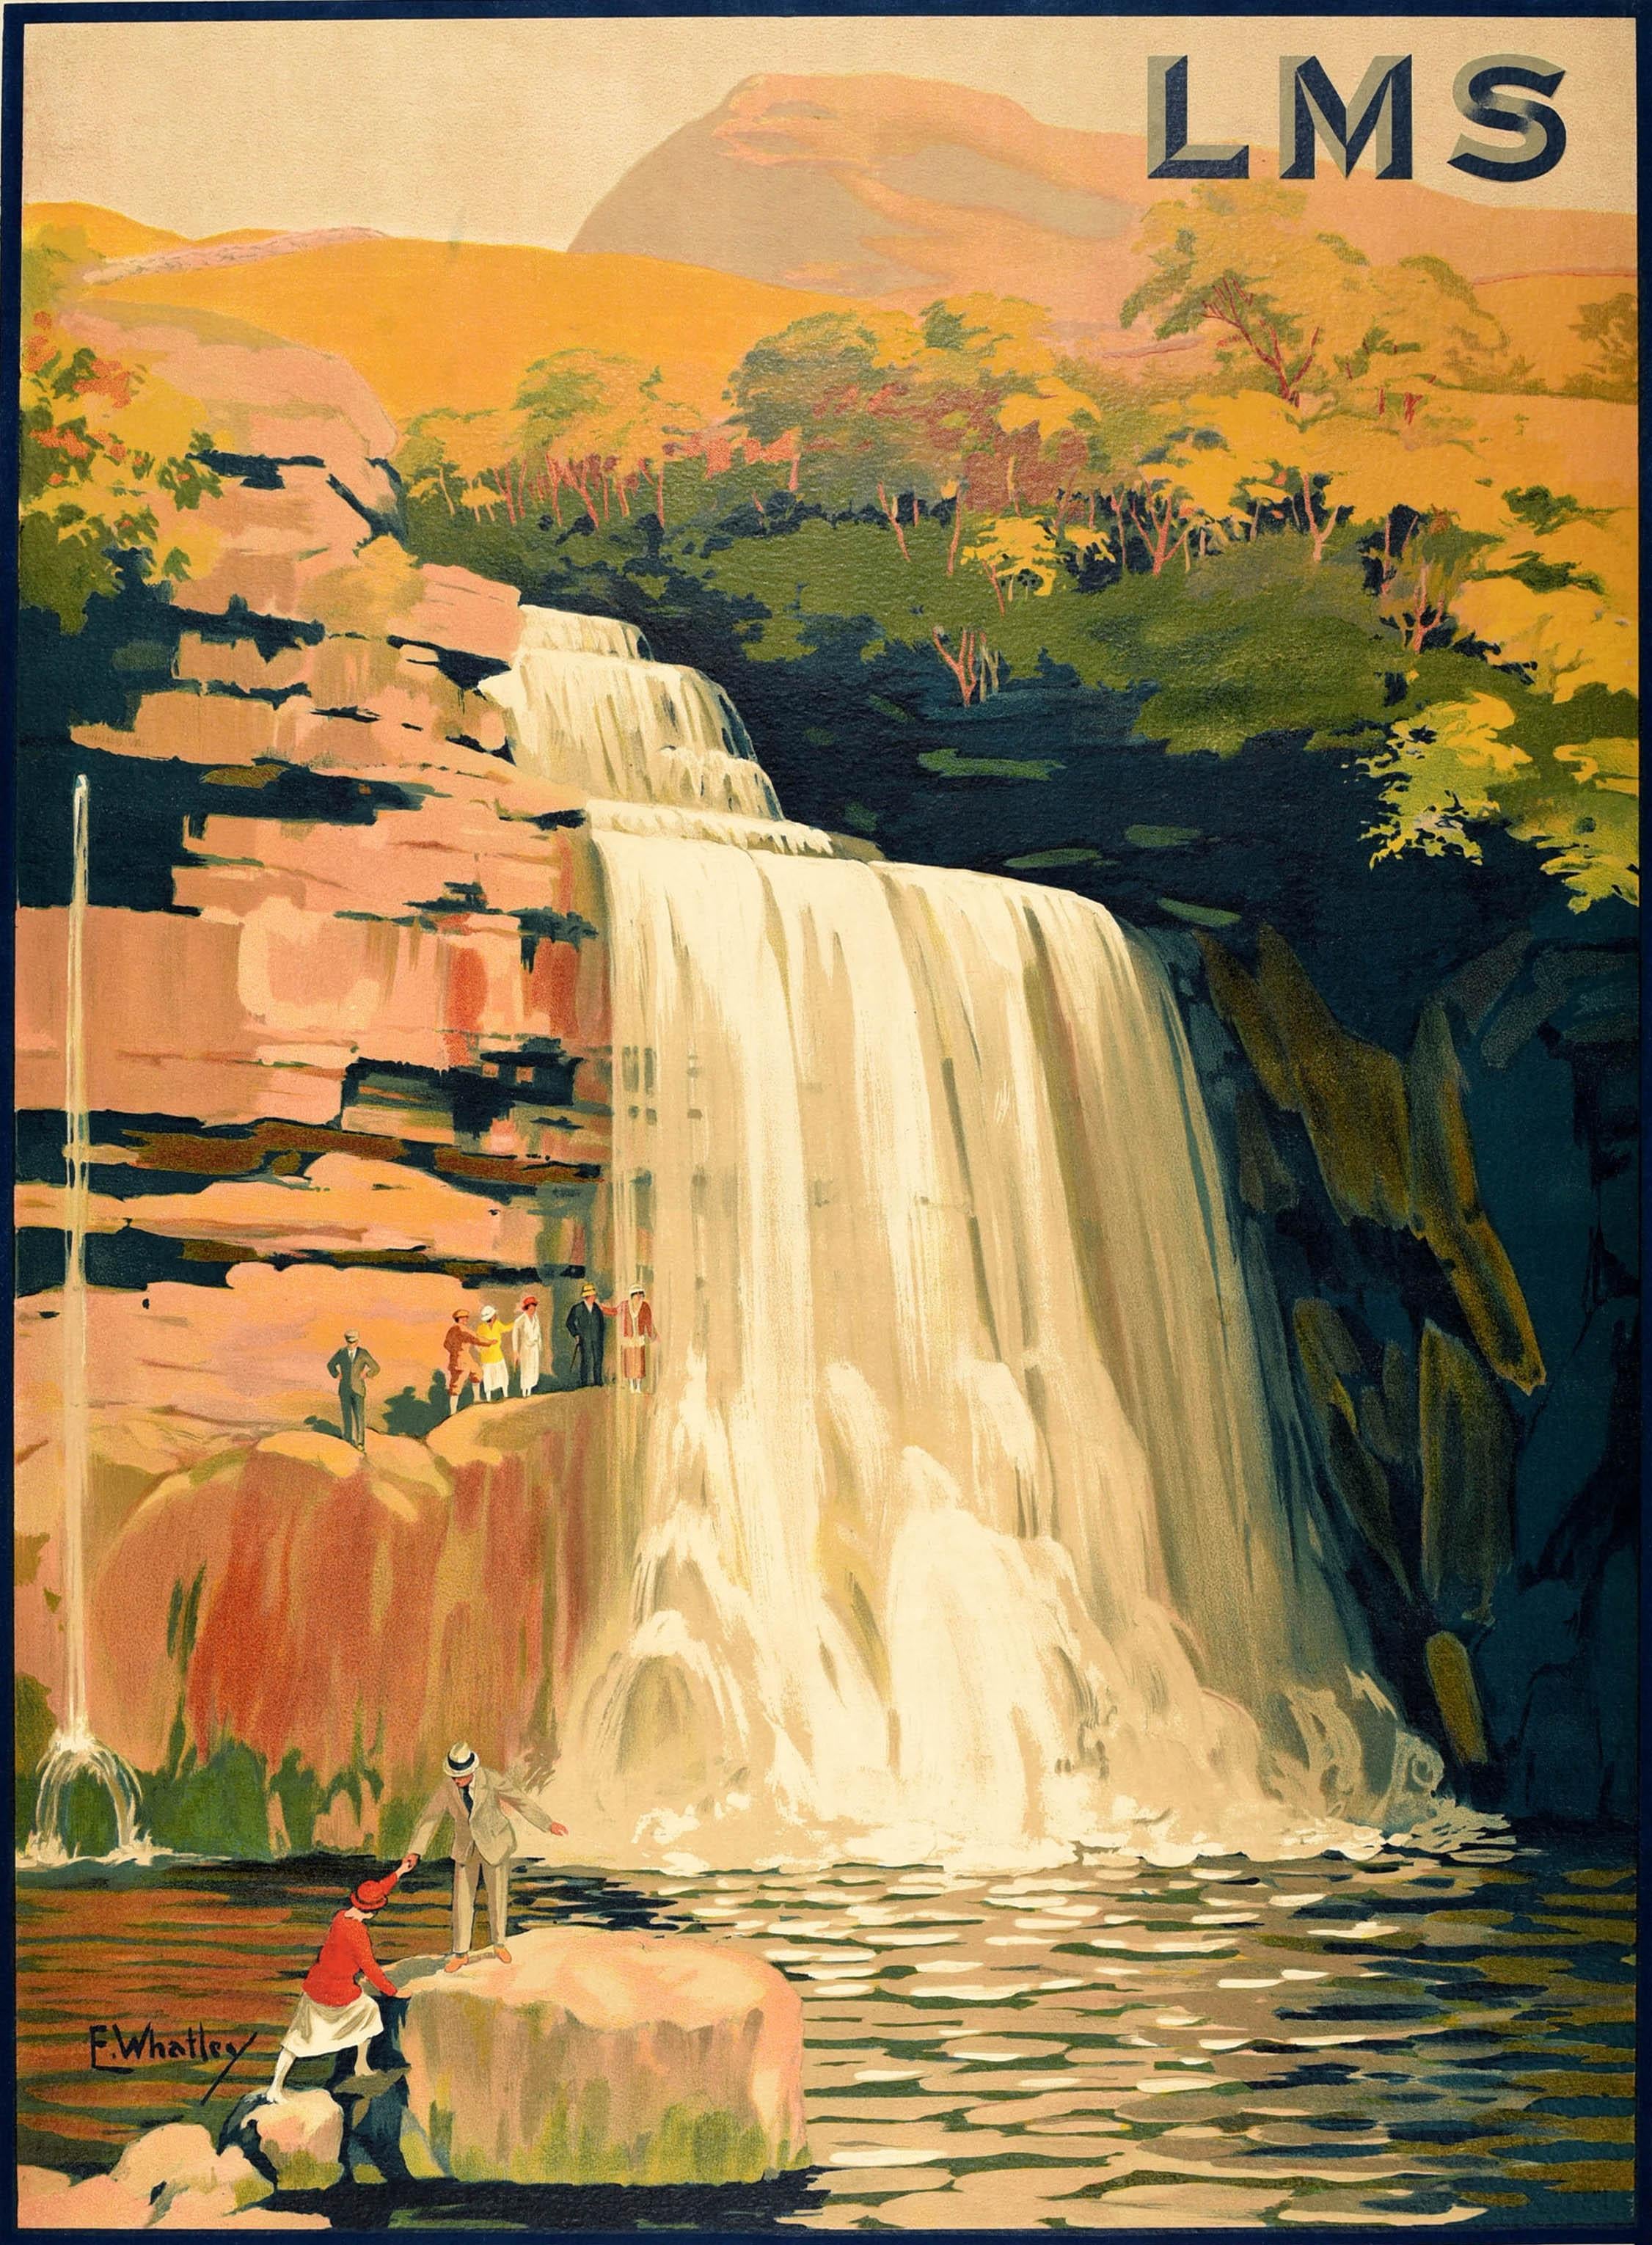 Original vintage travel poster issued by the London, Midland & Scottish Railway LMS - Ingleton The Land of Waterfalls Newly Discovered Caverns - featuring a stunning image of Thornton Falls on the Ingleton Waterfalls Trail depicting a gentleman